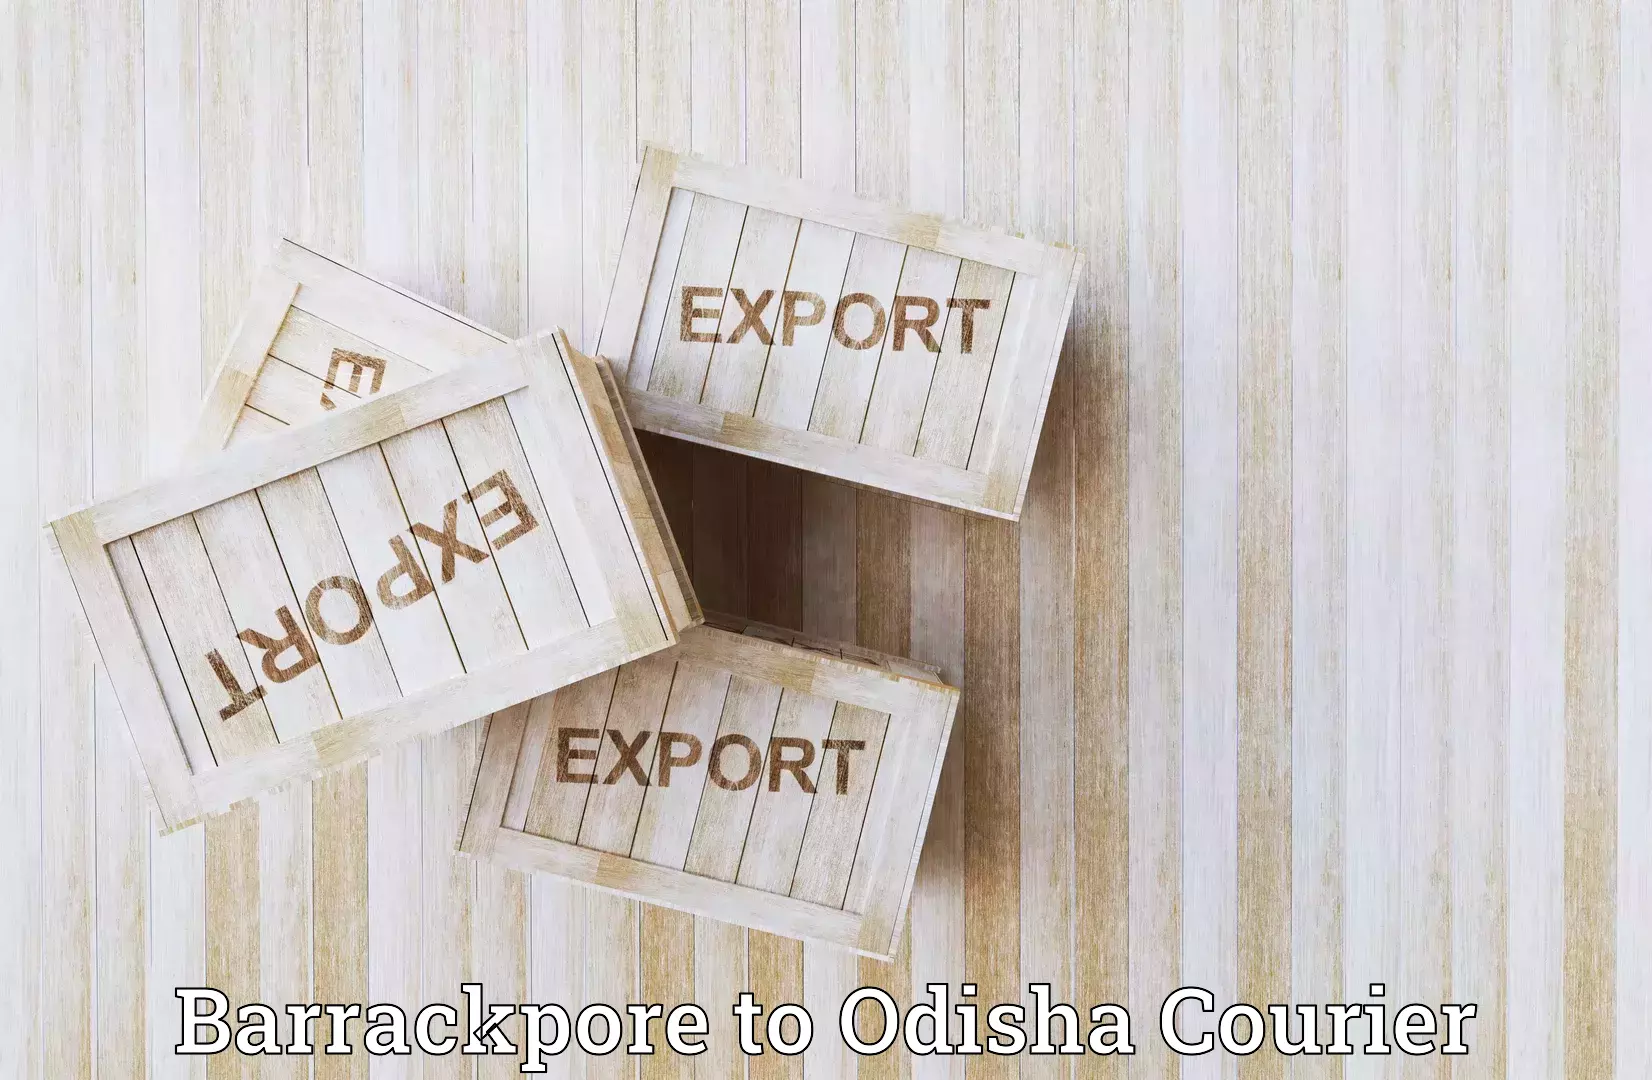 Business shipping needs Barrackpore to Cuttack